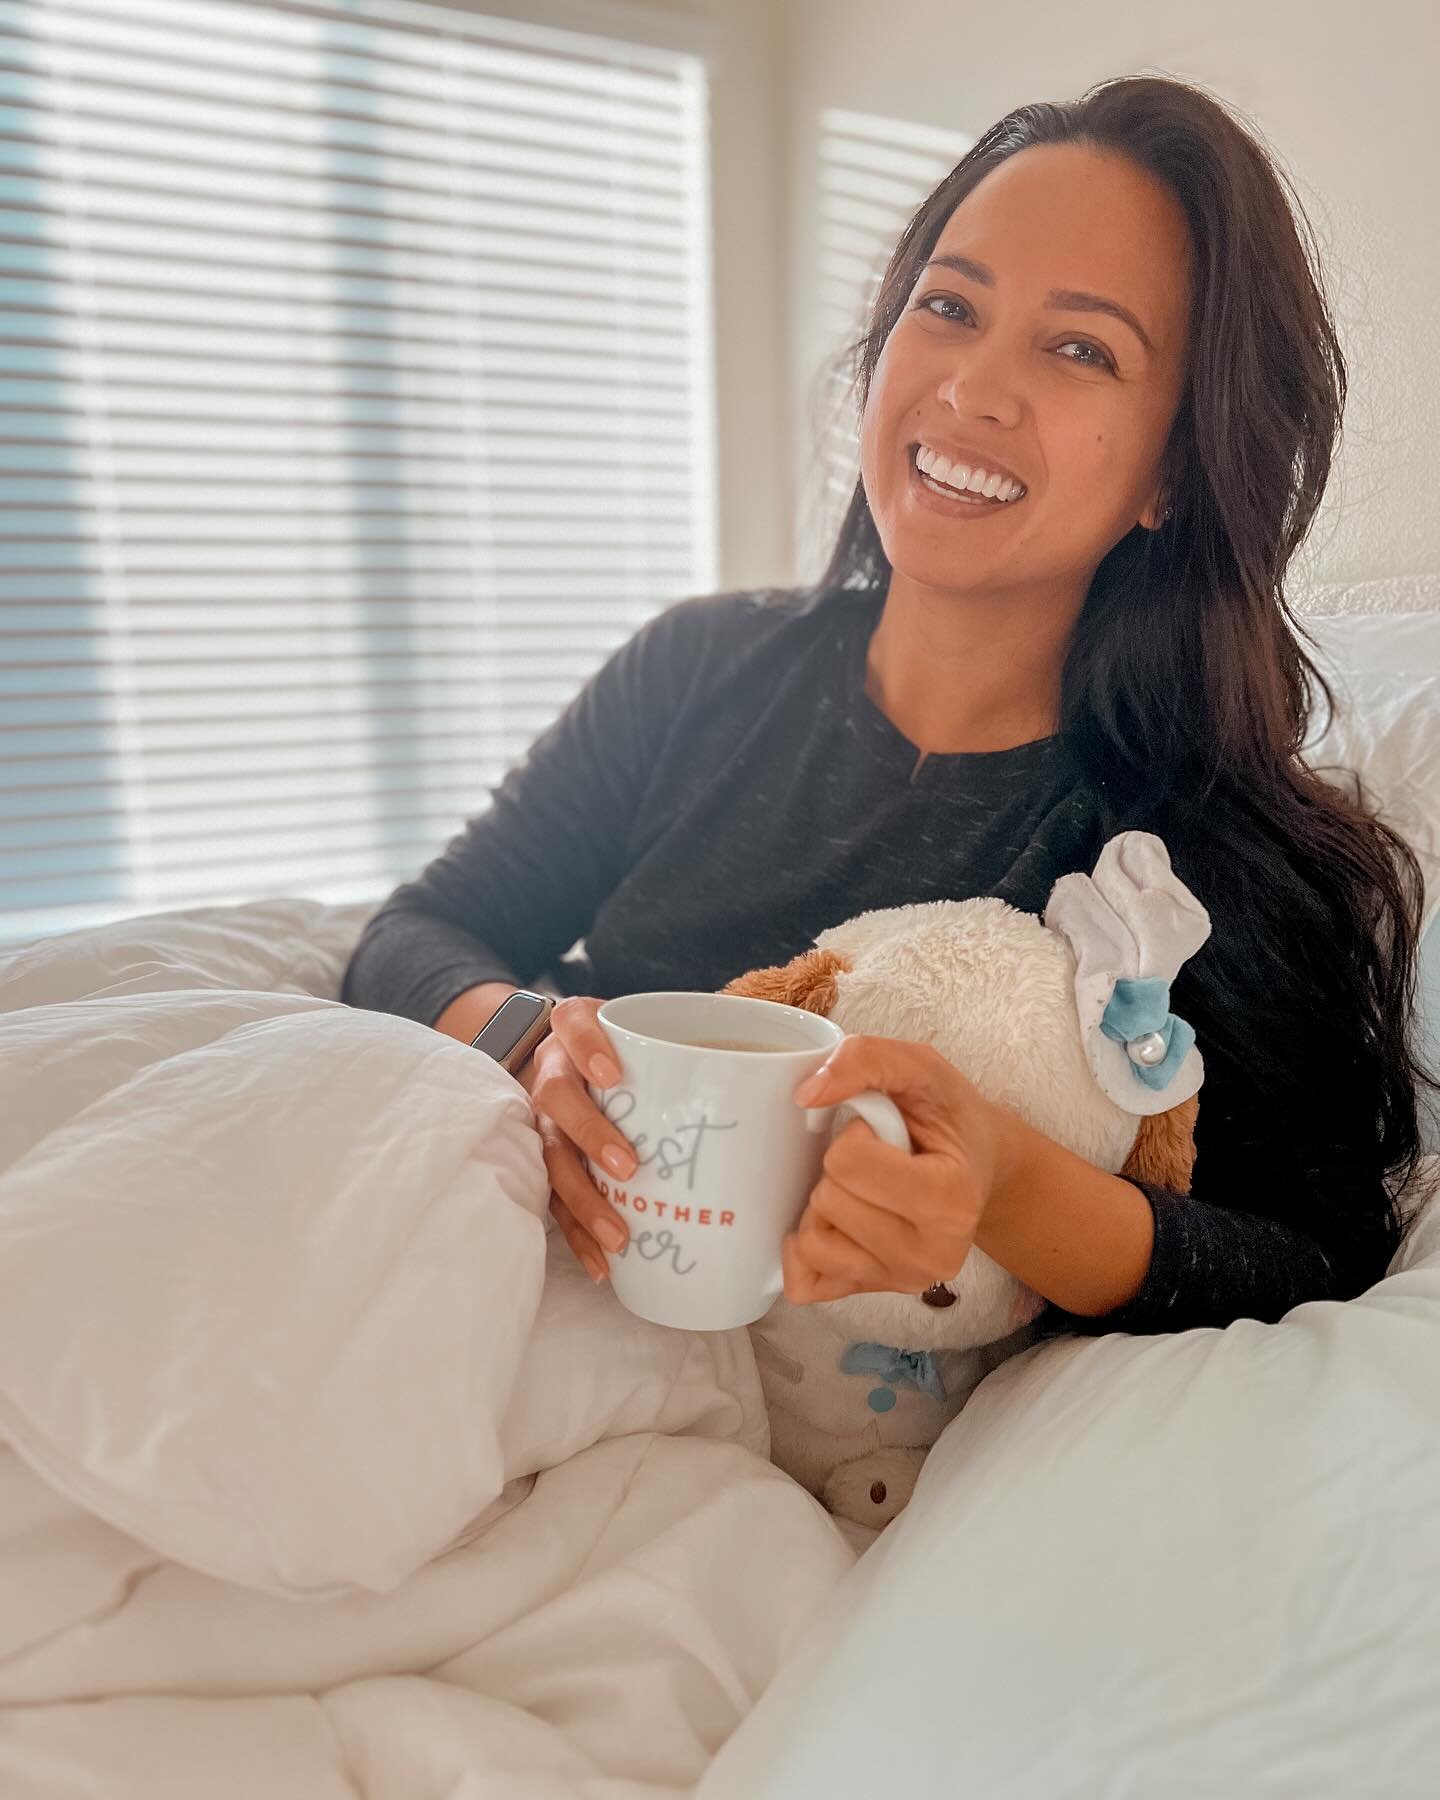 Another year older but my inner child is ageless 😜

Woke up to sunshine beaming through my window, a hot cup of coffee goodness made by my favorite person, and the warm greetings from those I love 💖

Spending the morning cozied in bed, thinking of 